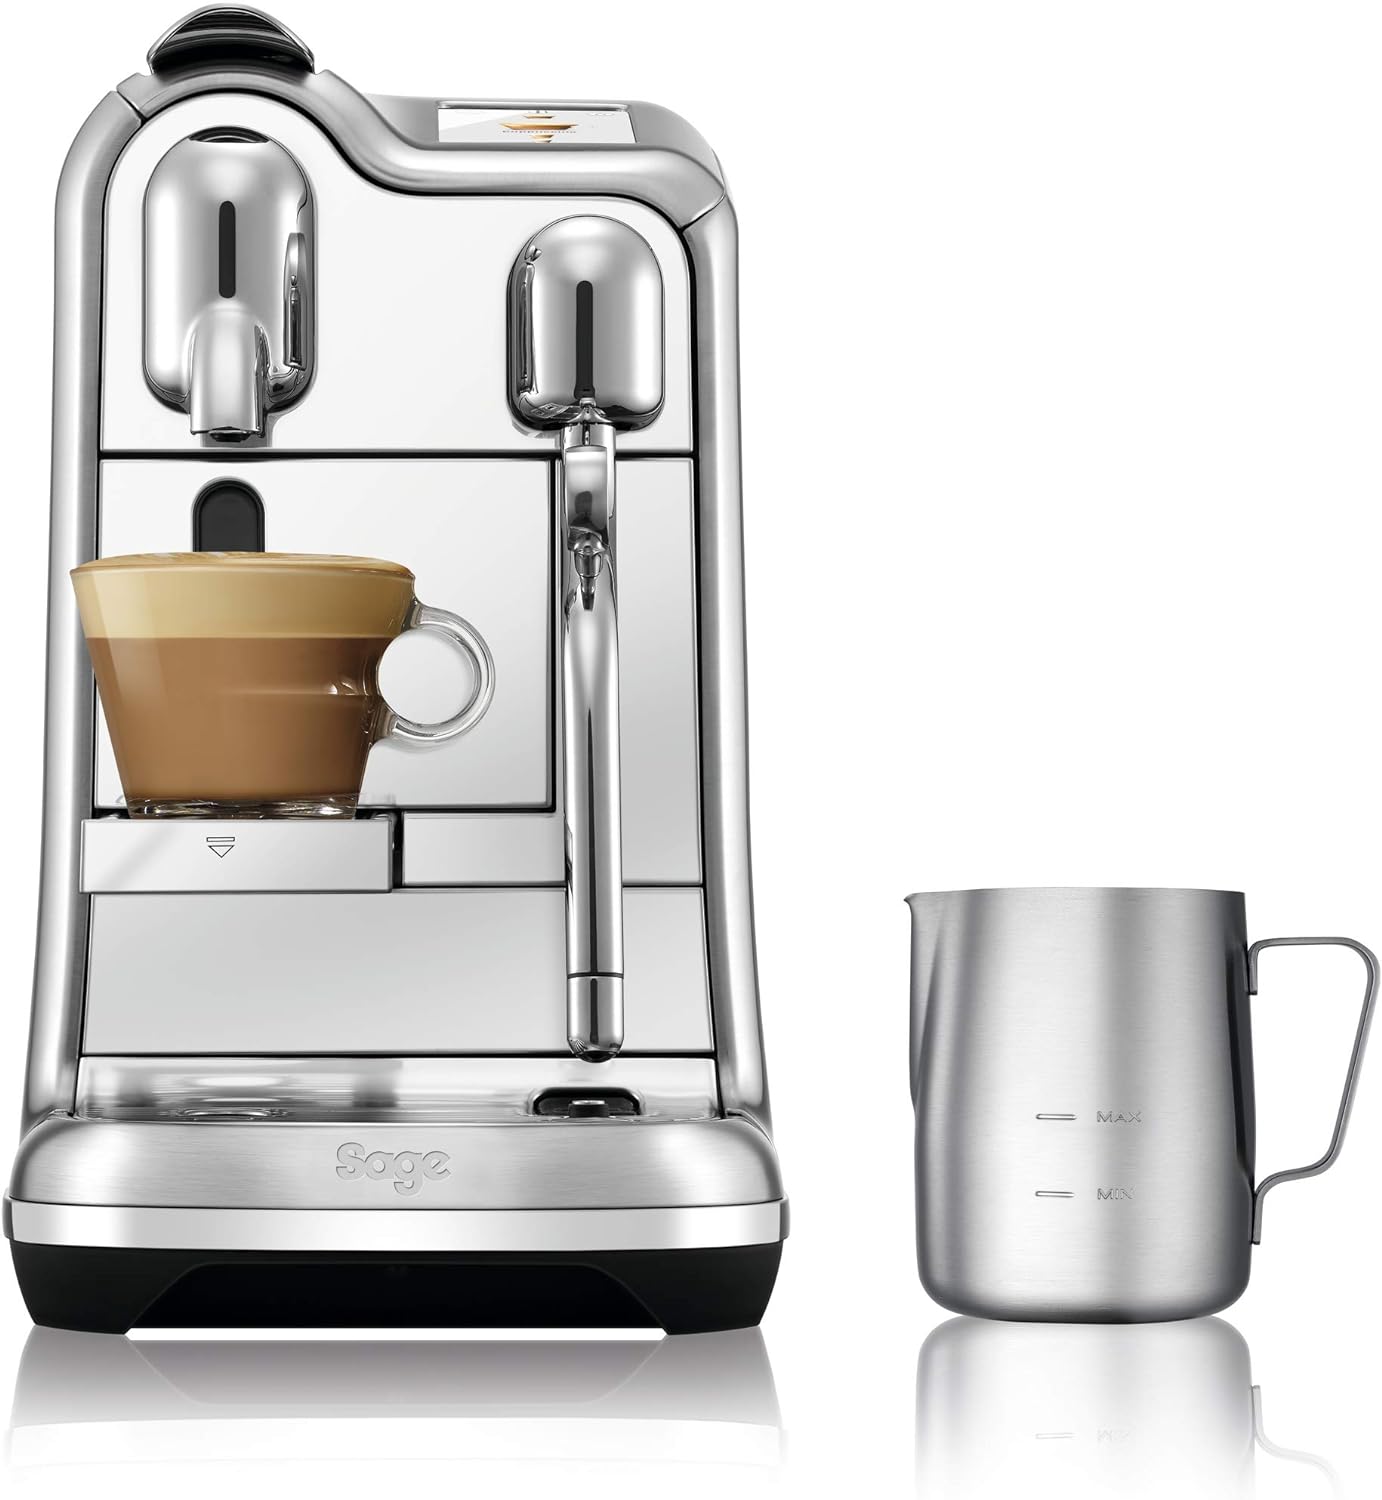 NESPRESSO SNE900 the Creatista Pro by Sage, 5.3 tons, brushed stainless steel - Amazing Gadgets Outlet